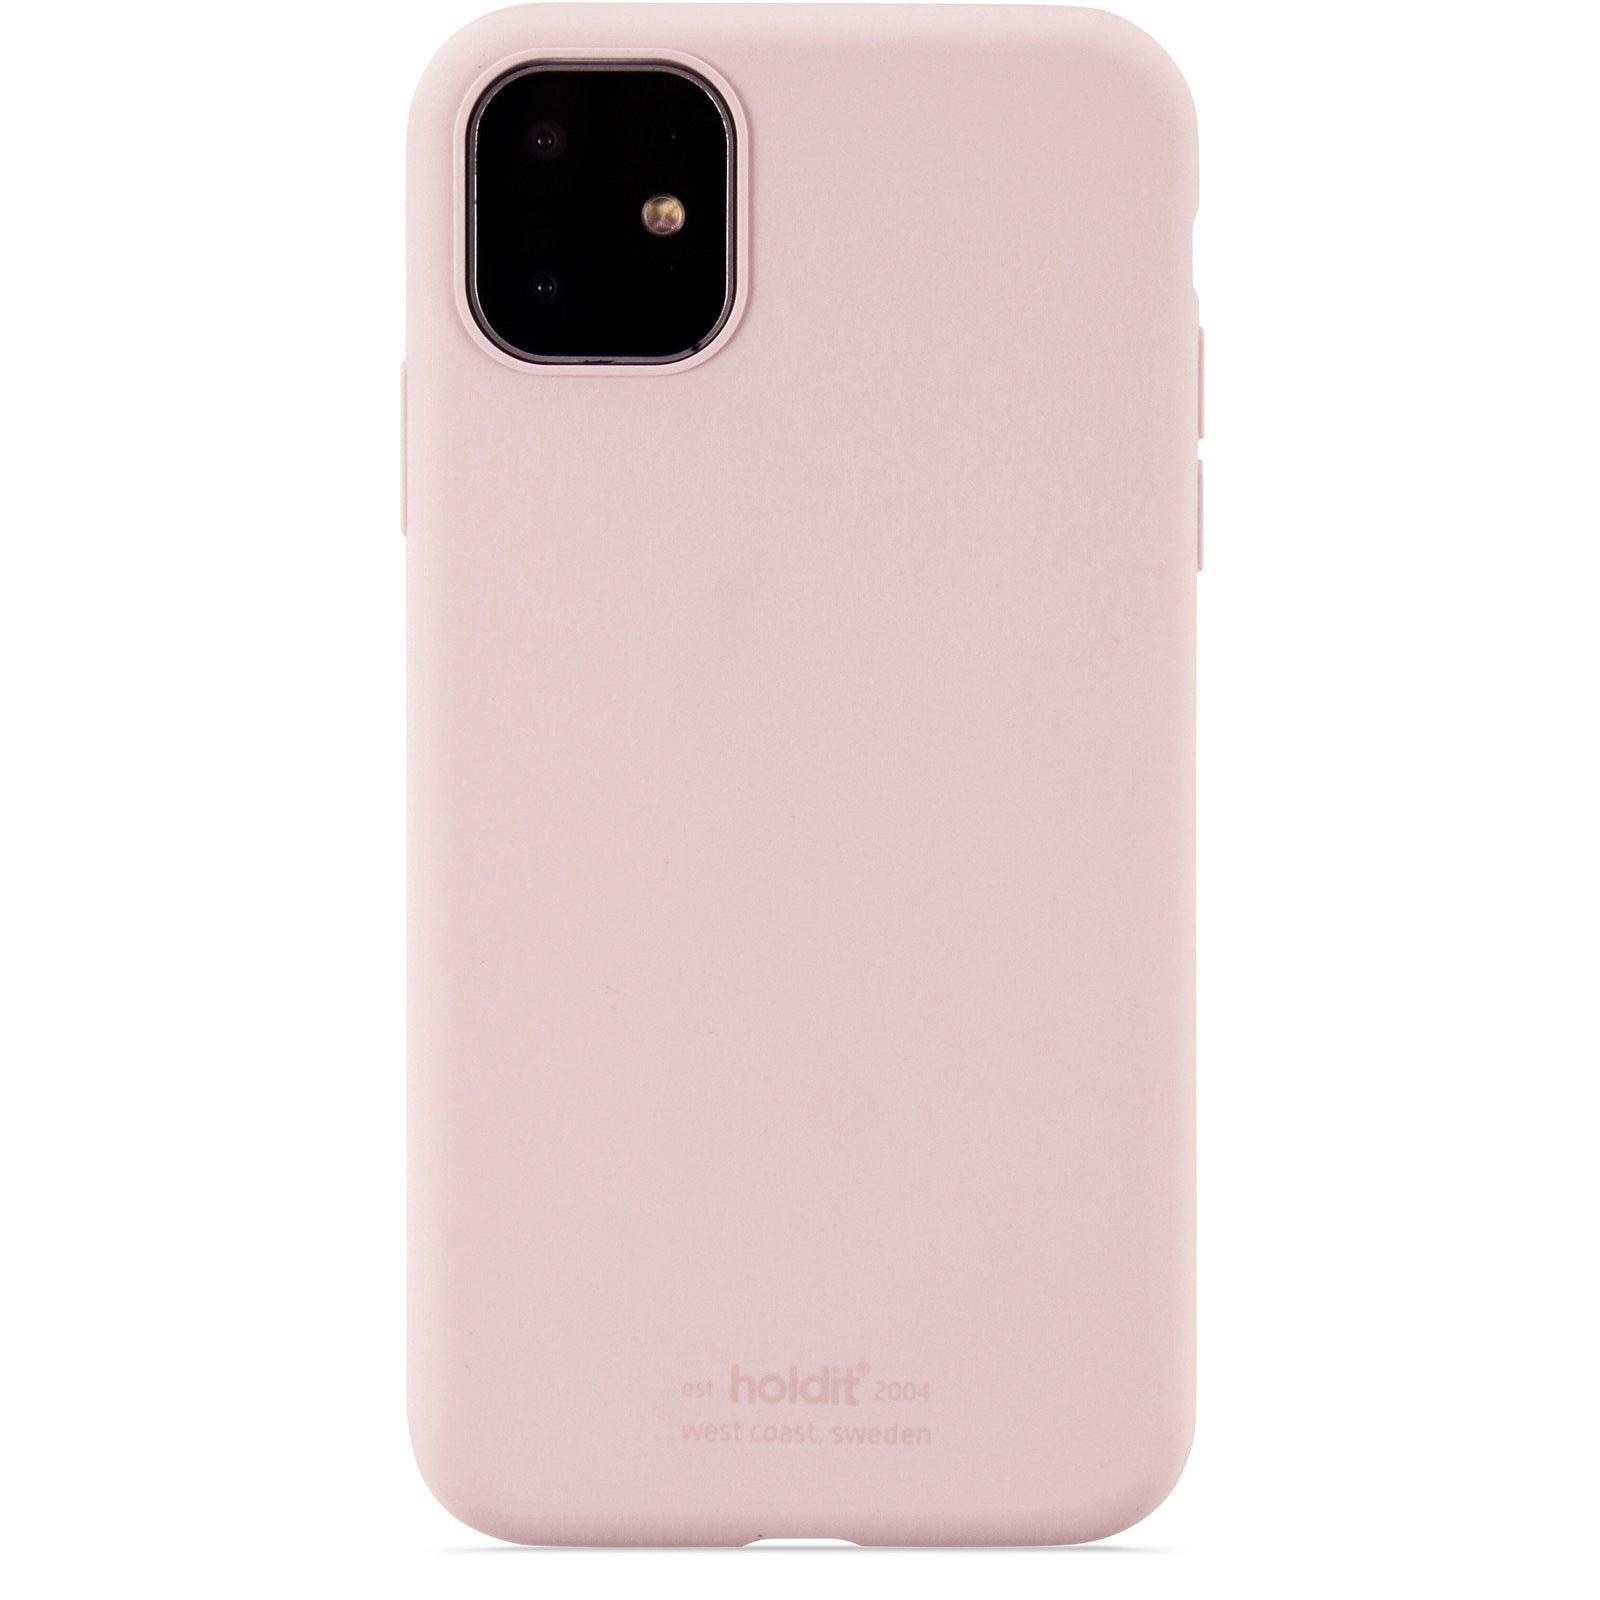 iPhone 11/XR Silicone Case, Blush Pink